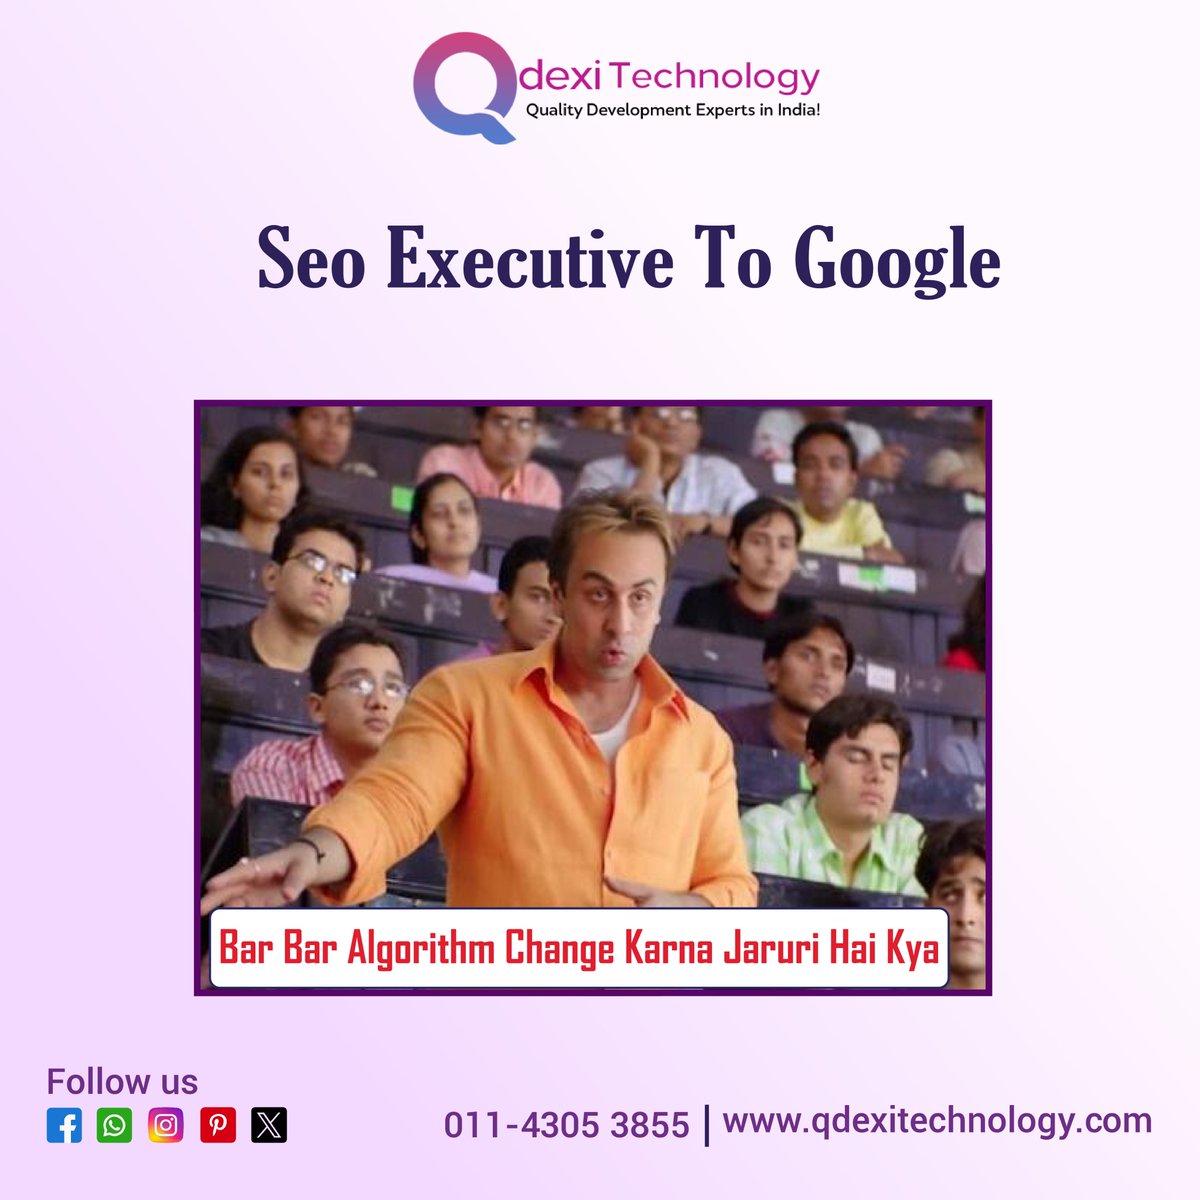 Quality development experts in India excel in SEO. Constant algorithm changes can enhance search engine performance. Qdexi Technology: Quality Solutions, Innovative Approach.

#QualityDevelopment #ExpertsIndia #SEOExecutive #GoogleAlgorithm #AlgorithmChanges